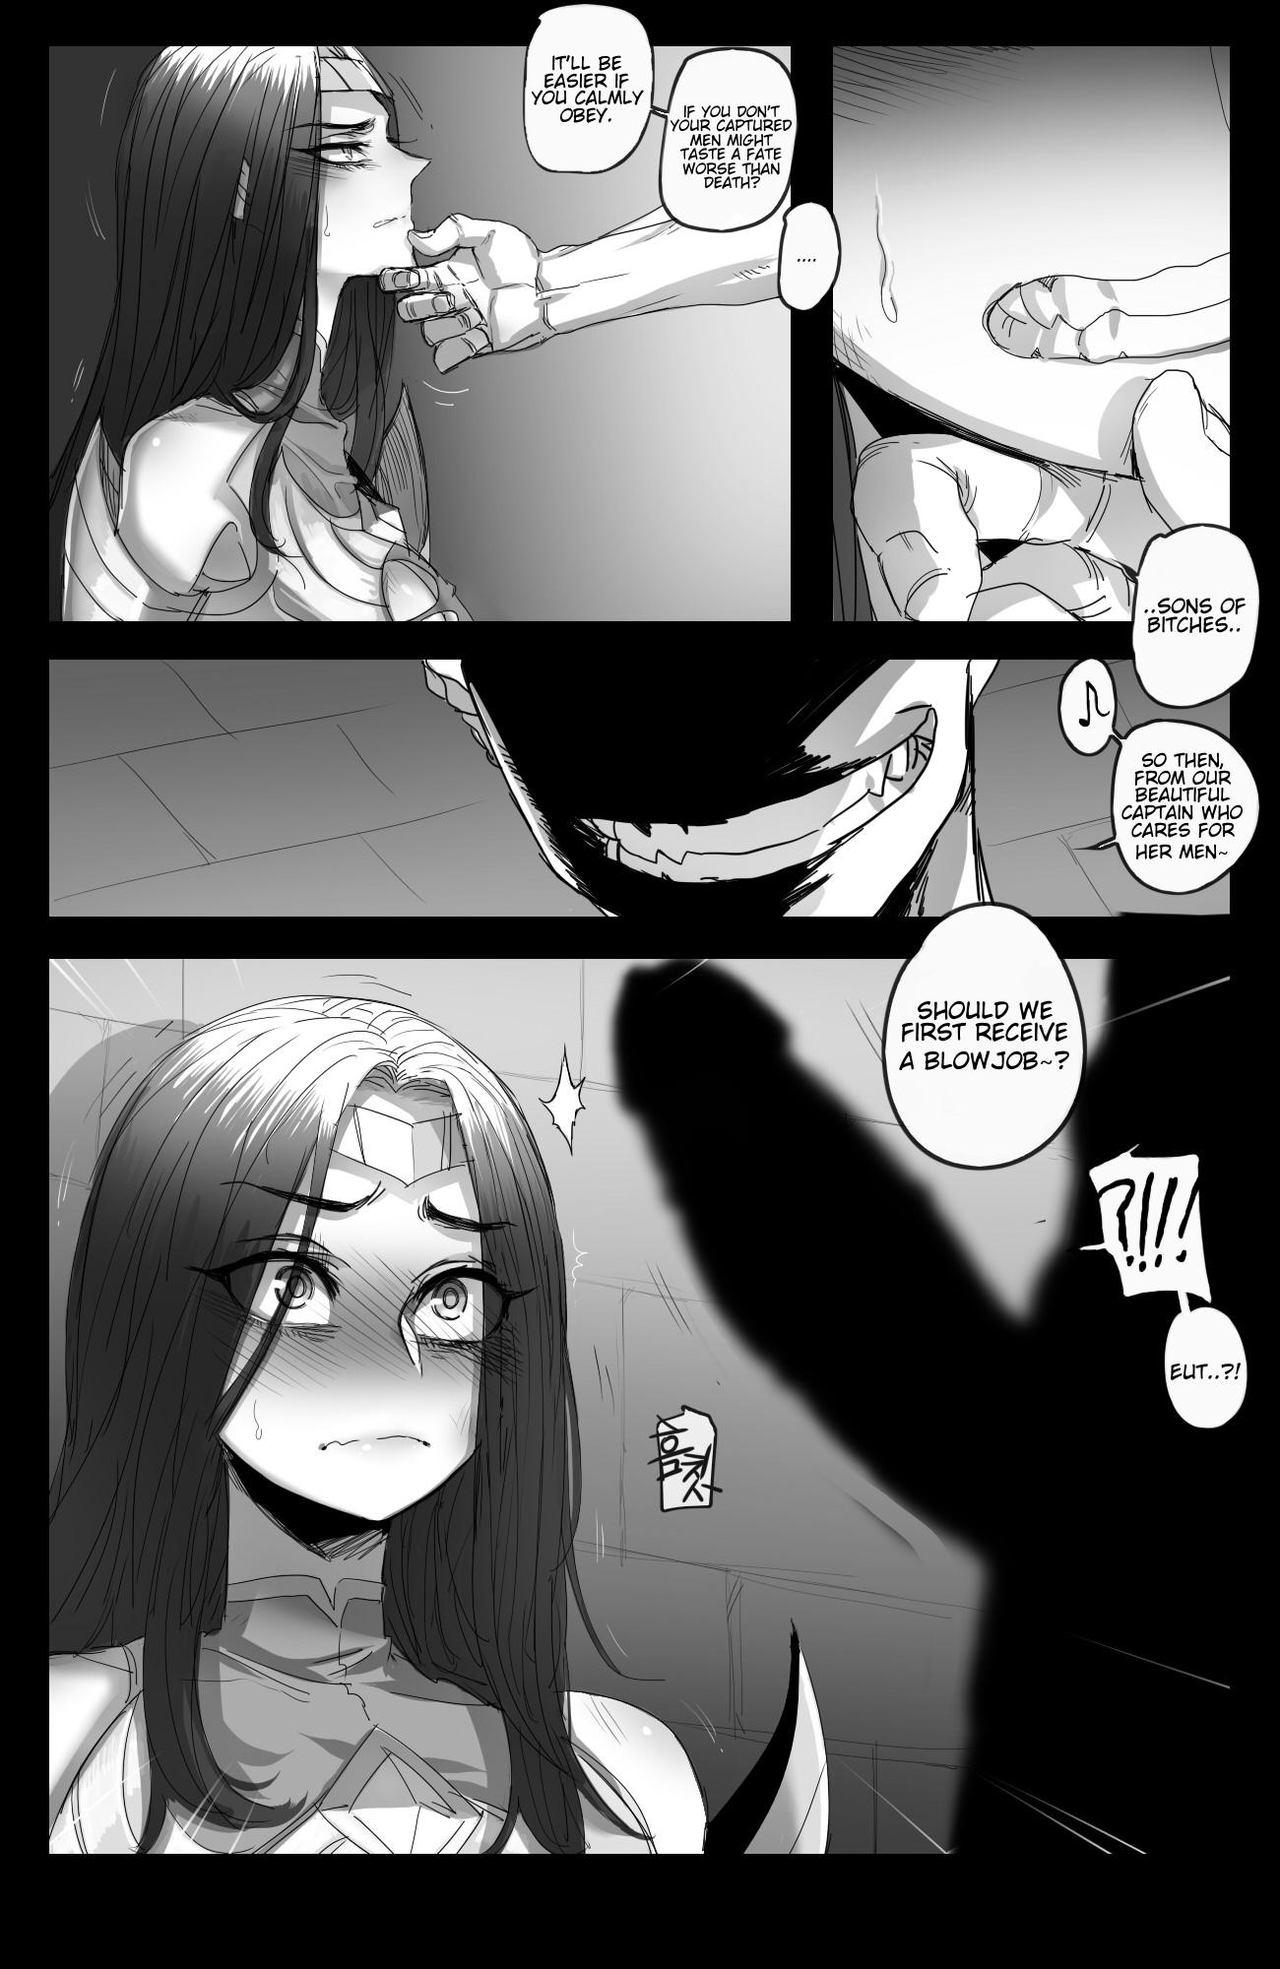 Amateur Sex The Fall of Irelia - League of legends Cuckolding - Page 4